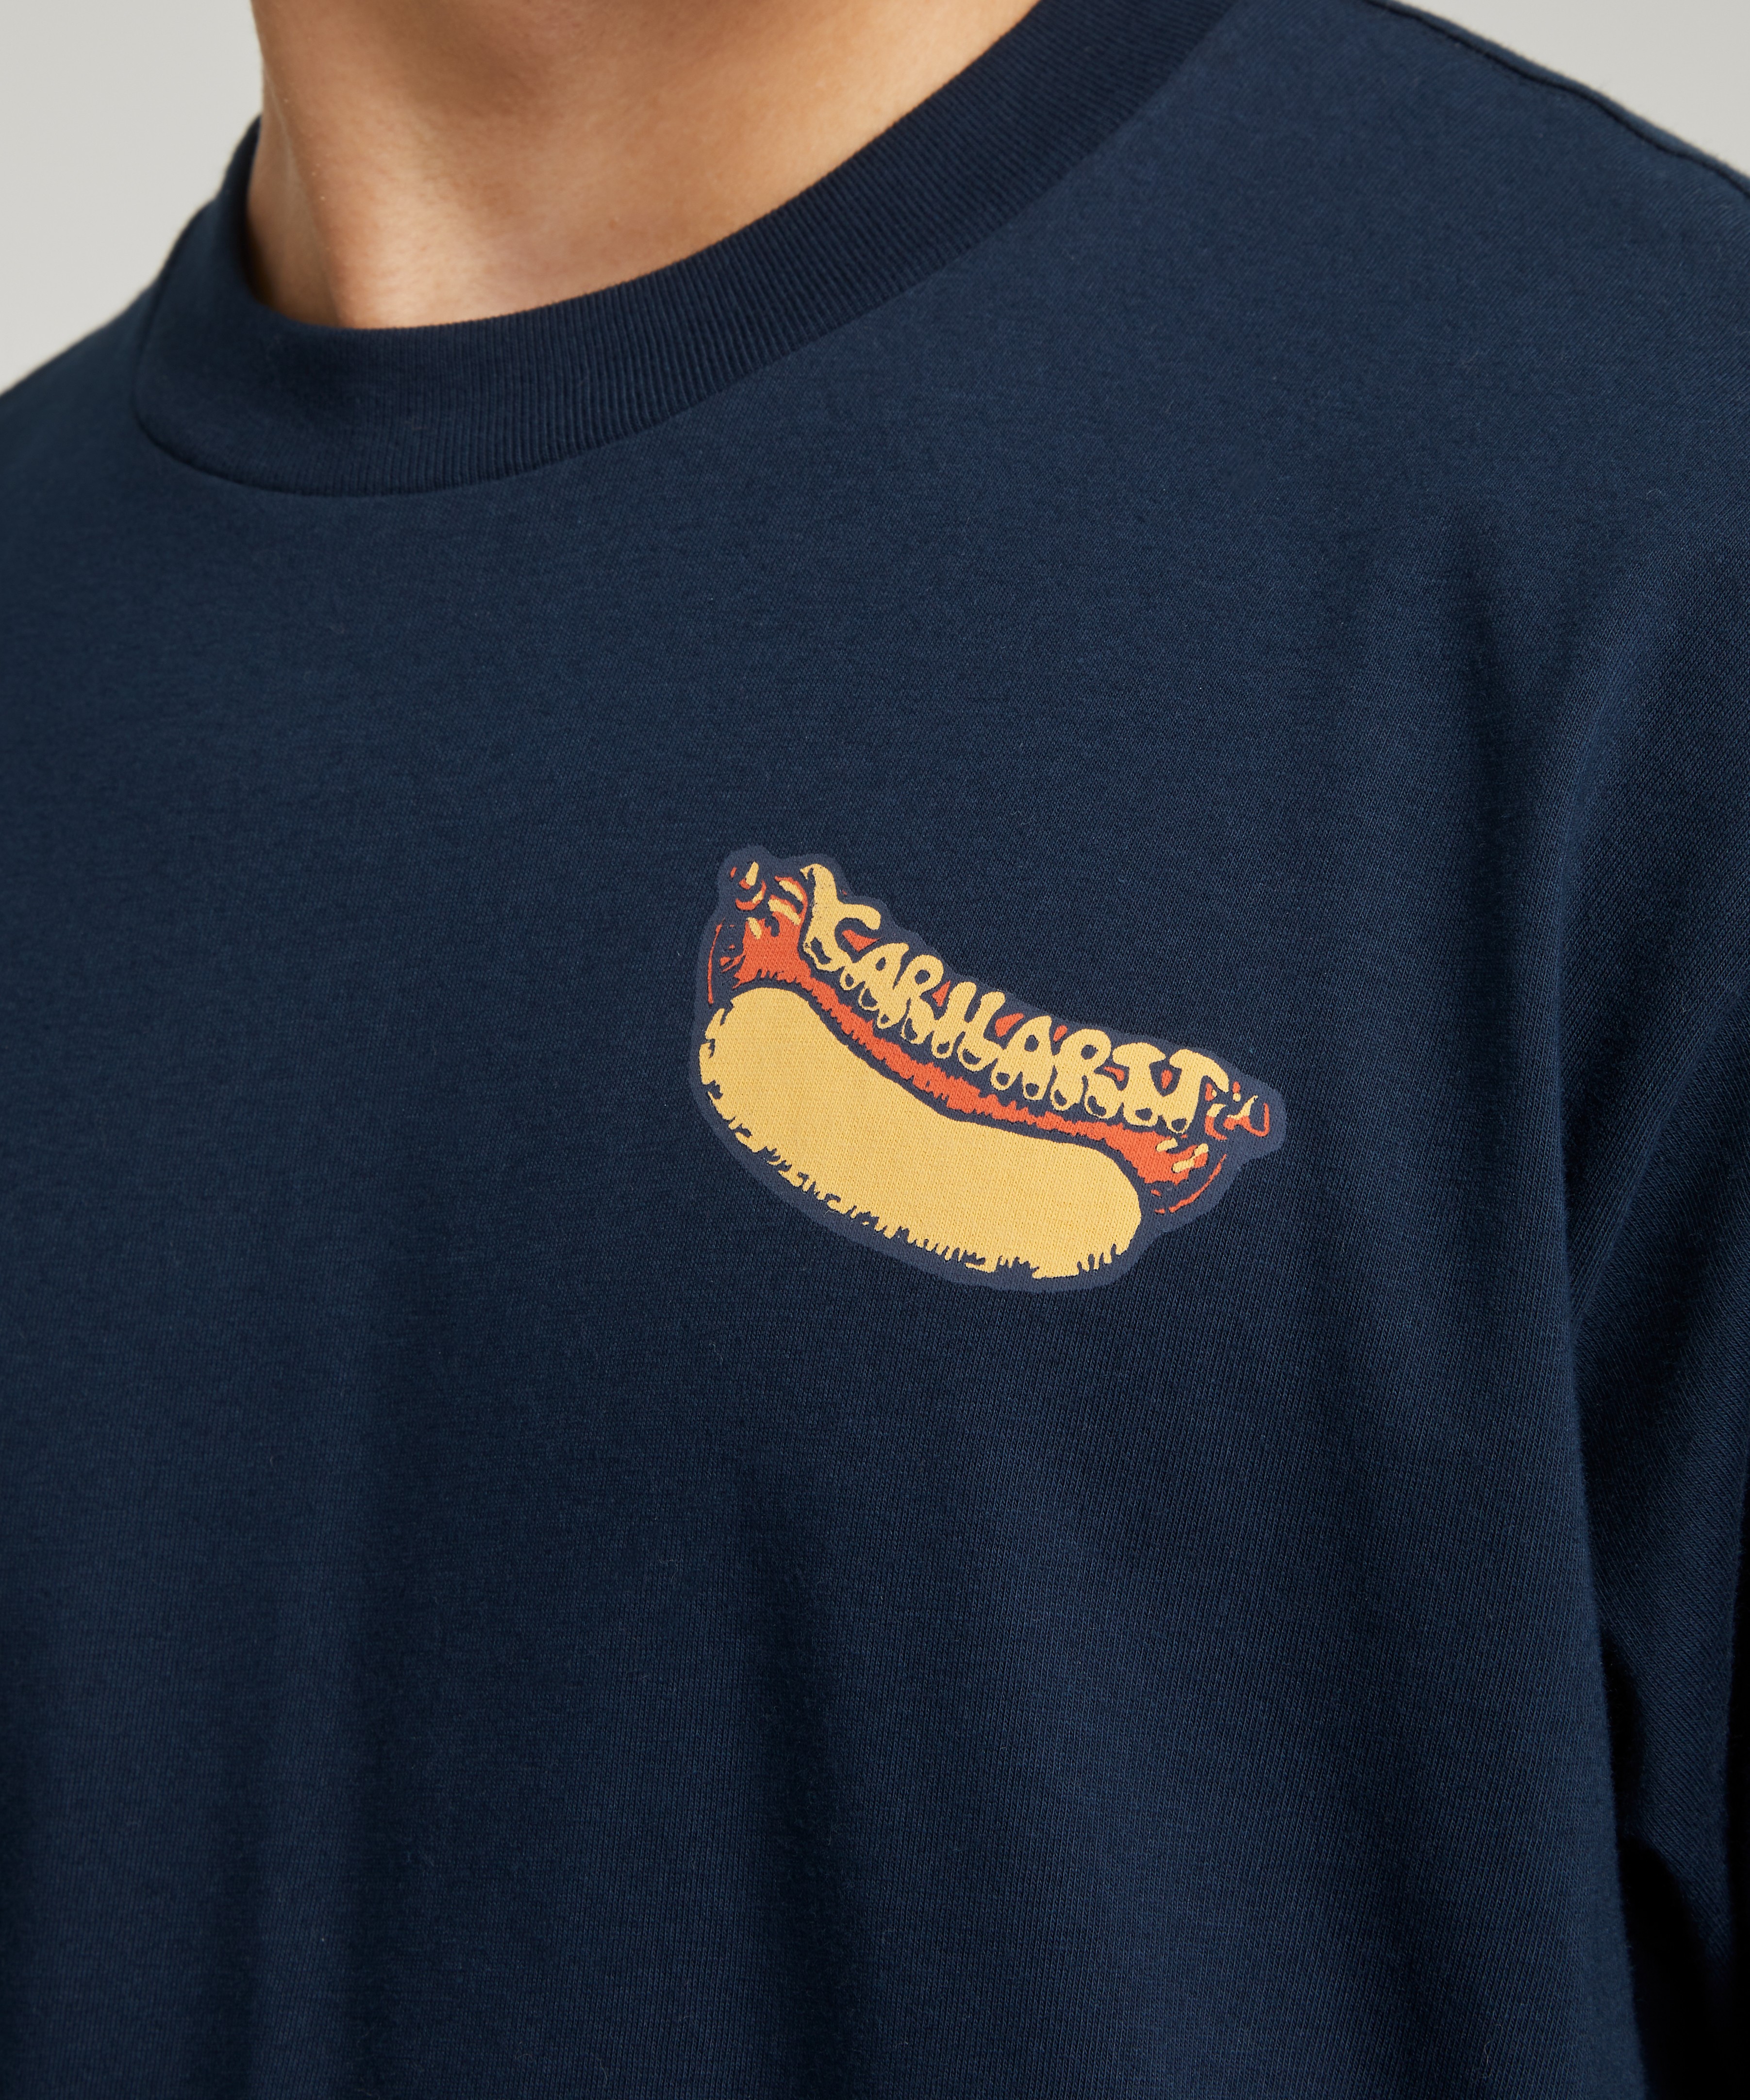 Carhartt WIP - S/S Flavor Hot-Dog T-Shirt image number 4